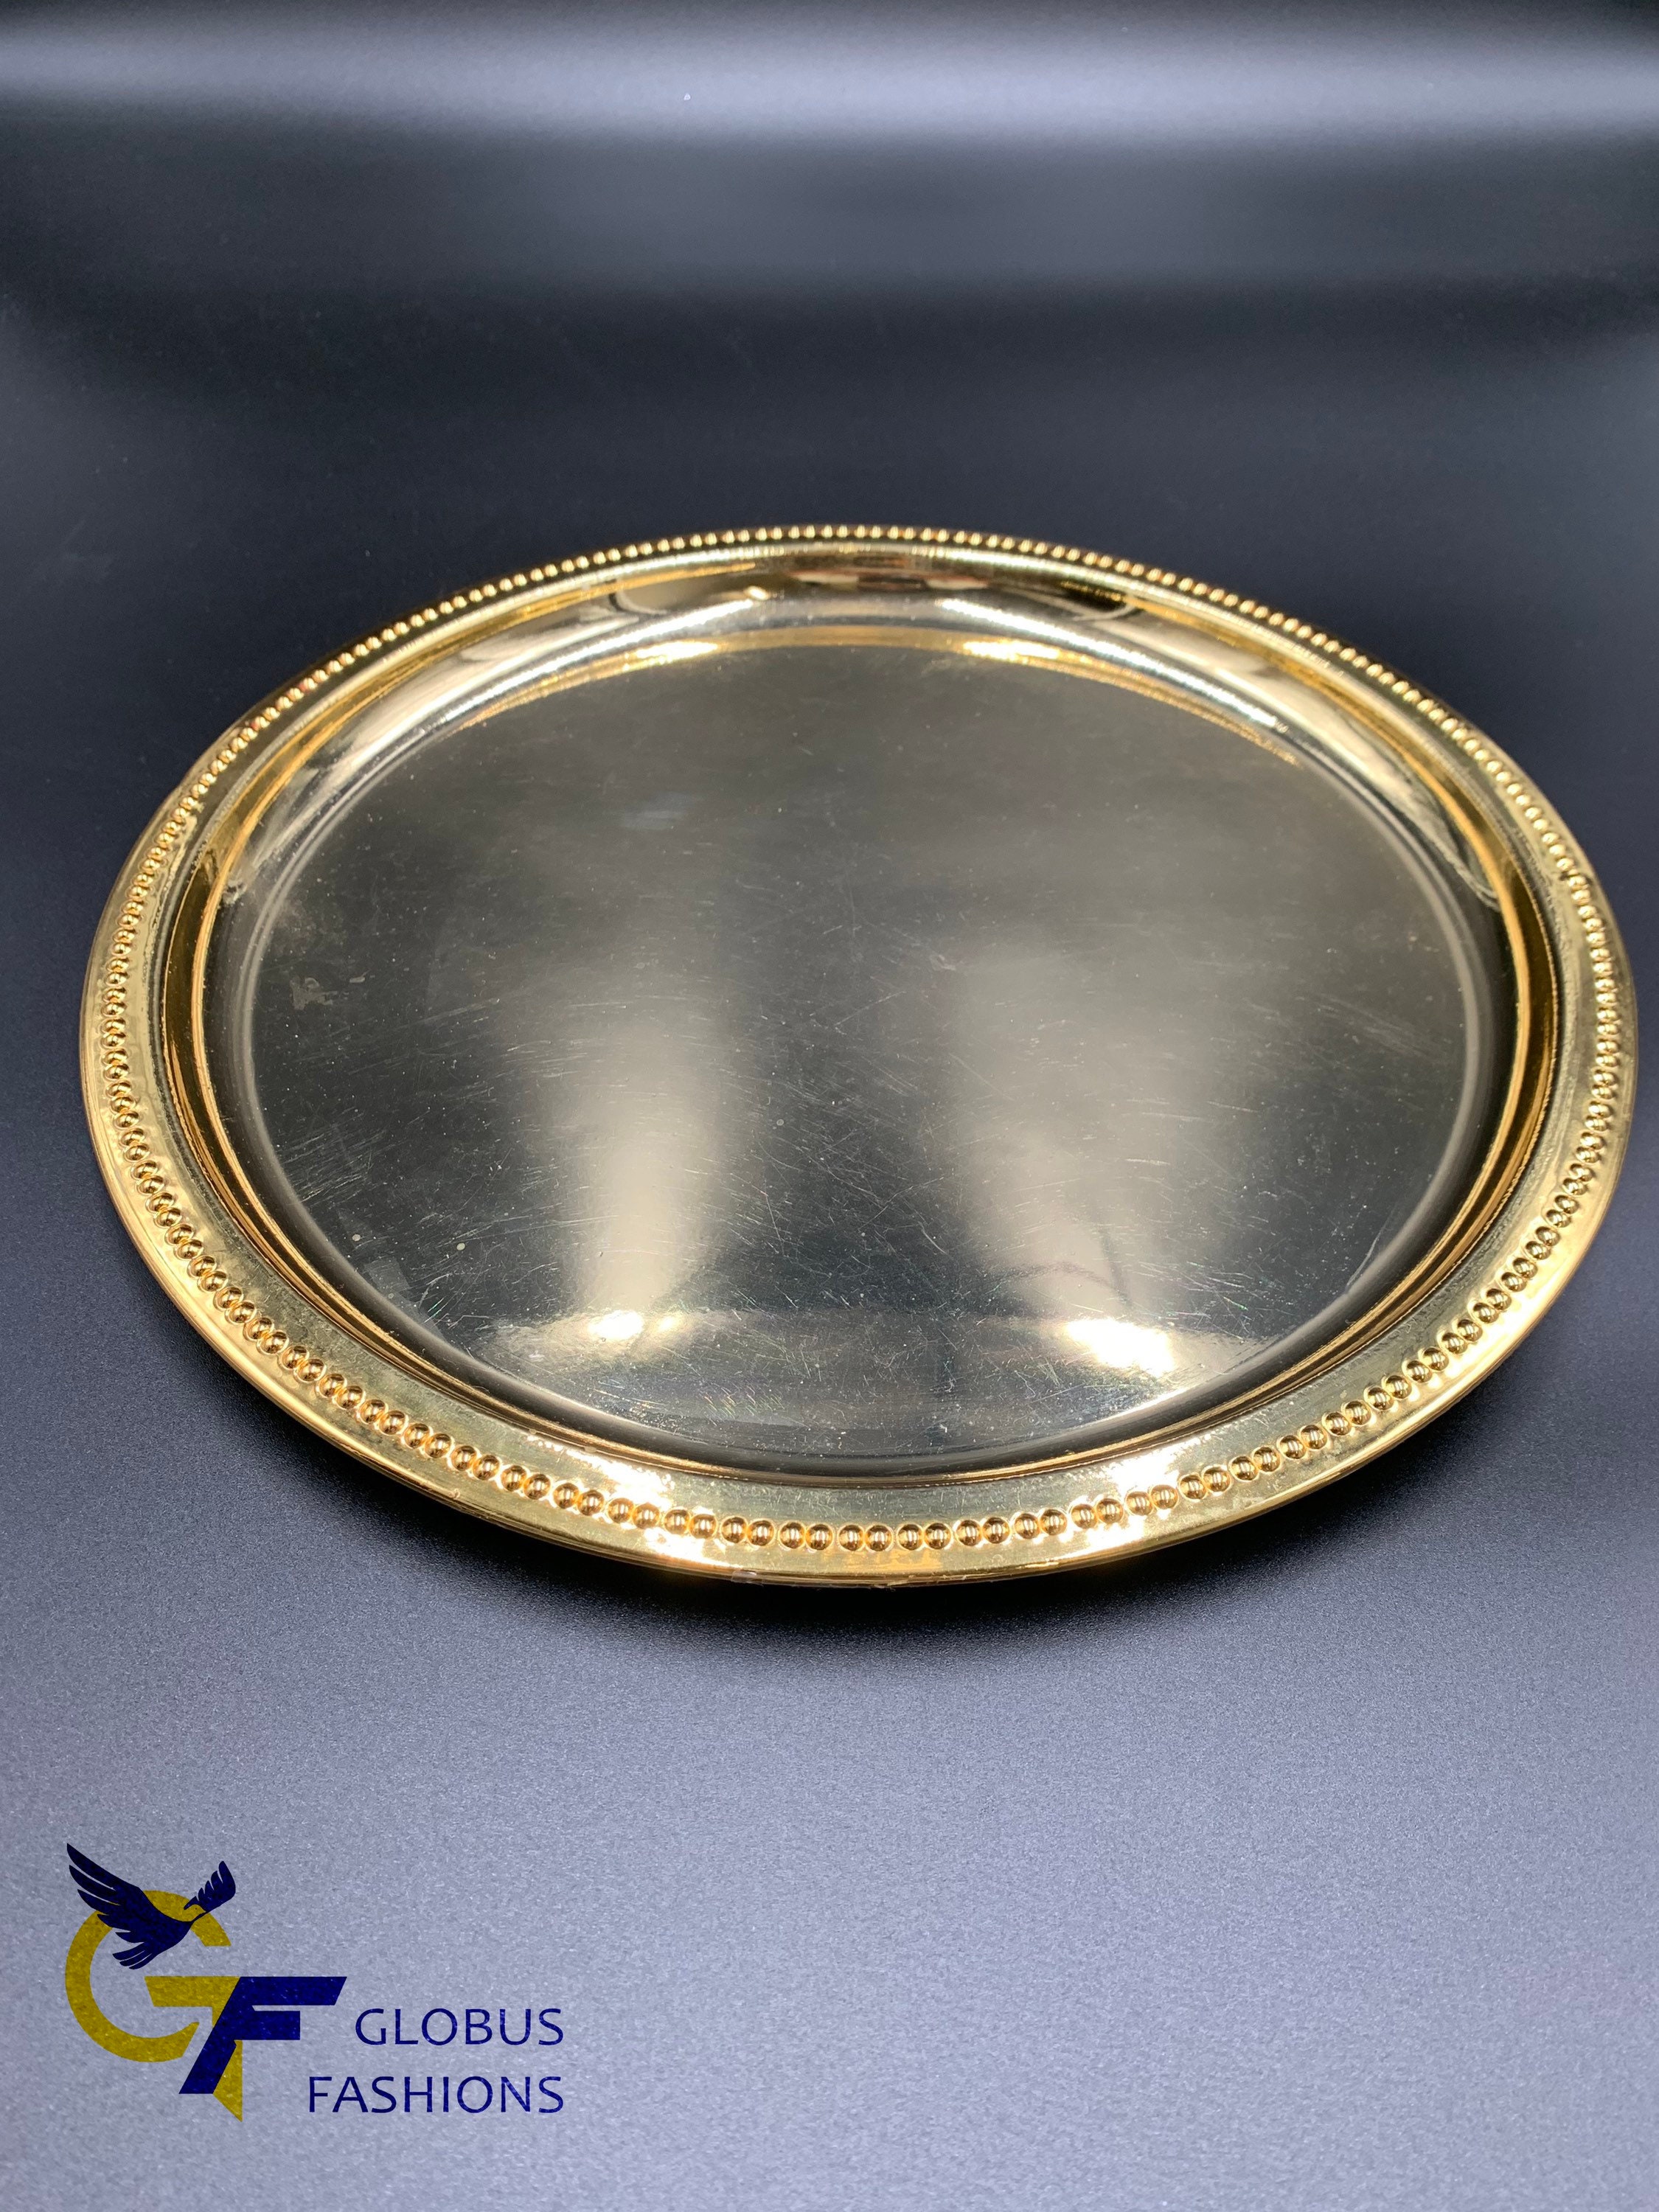 Gold Plate/ Silver Plate/ Puja Plate/ Thali Plate/ Devine/ Plate